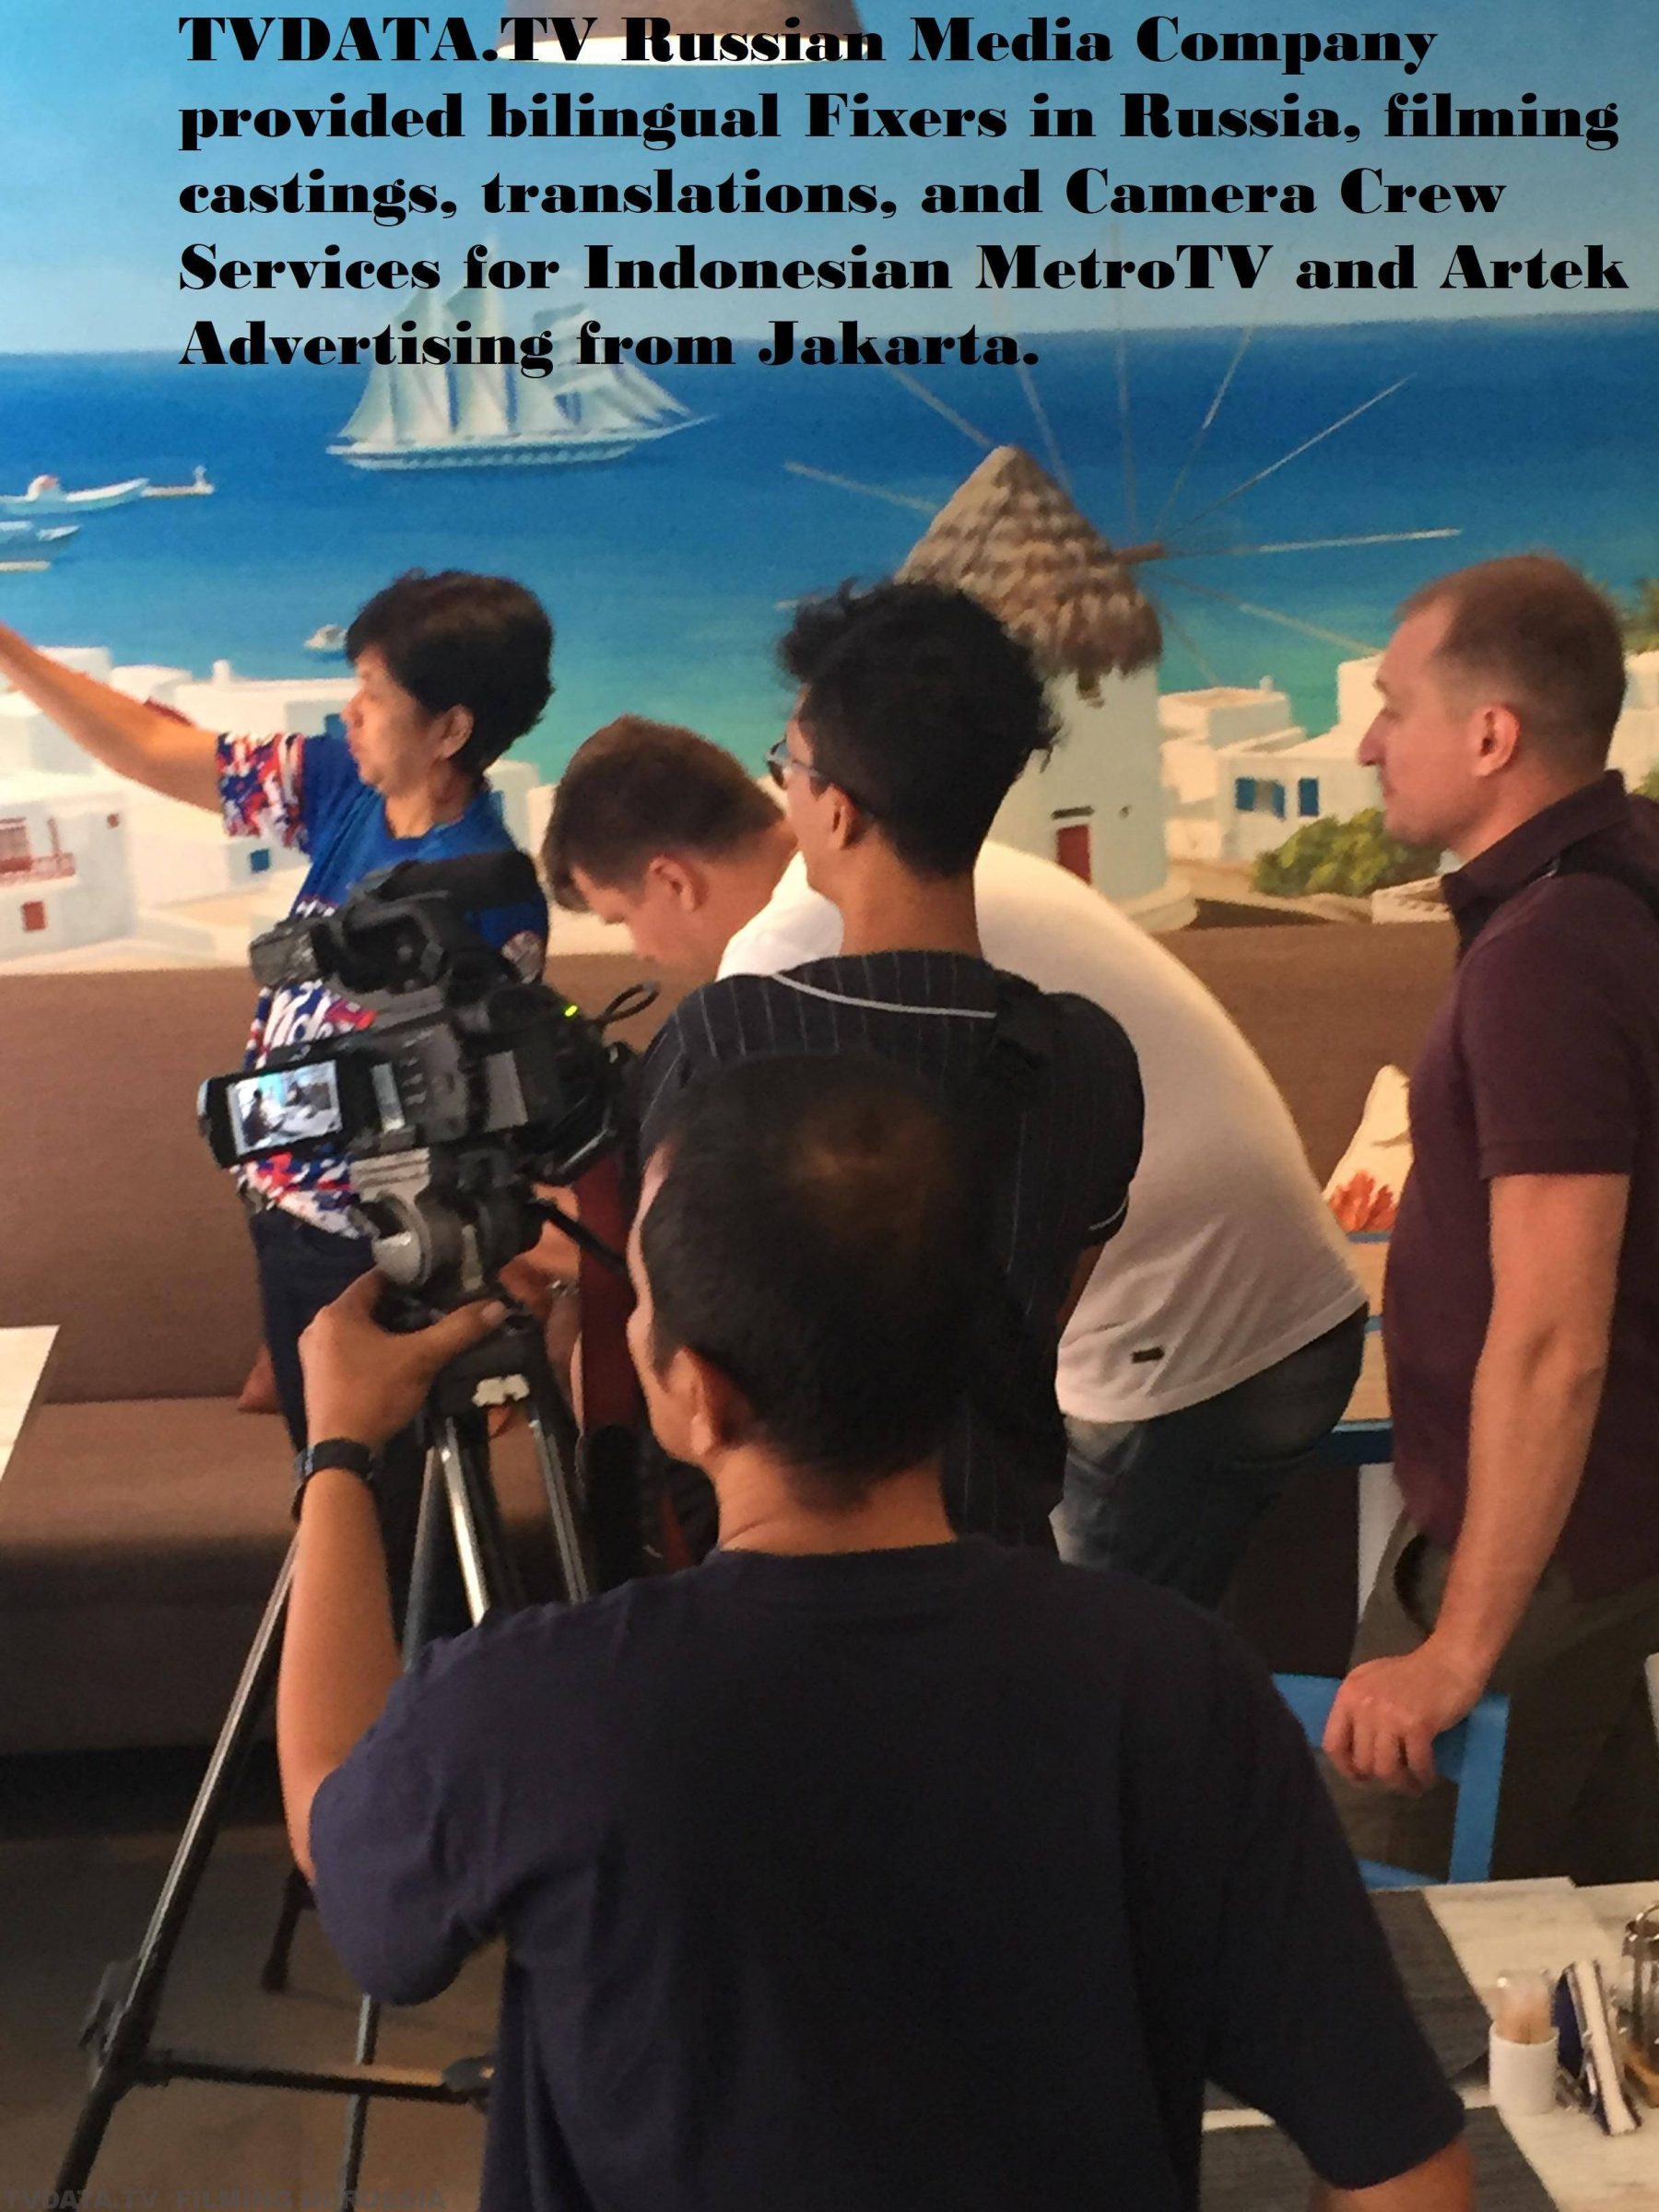 TVDATA.TV Russian Media Company provided bilingual Fixers in Russia, filming castings, translations, and Camera Crew Services for Indonesian MetroTV and Artek Advertising from Jakarta. 